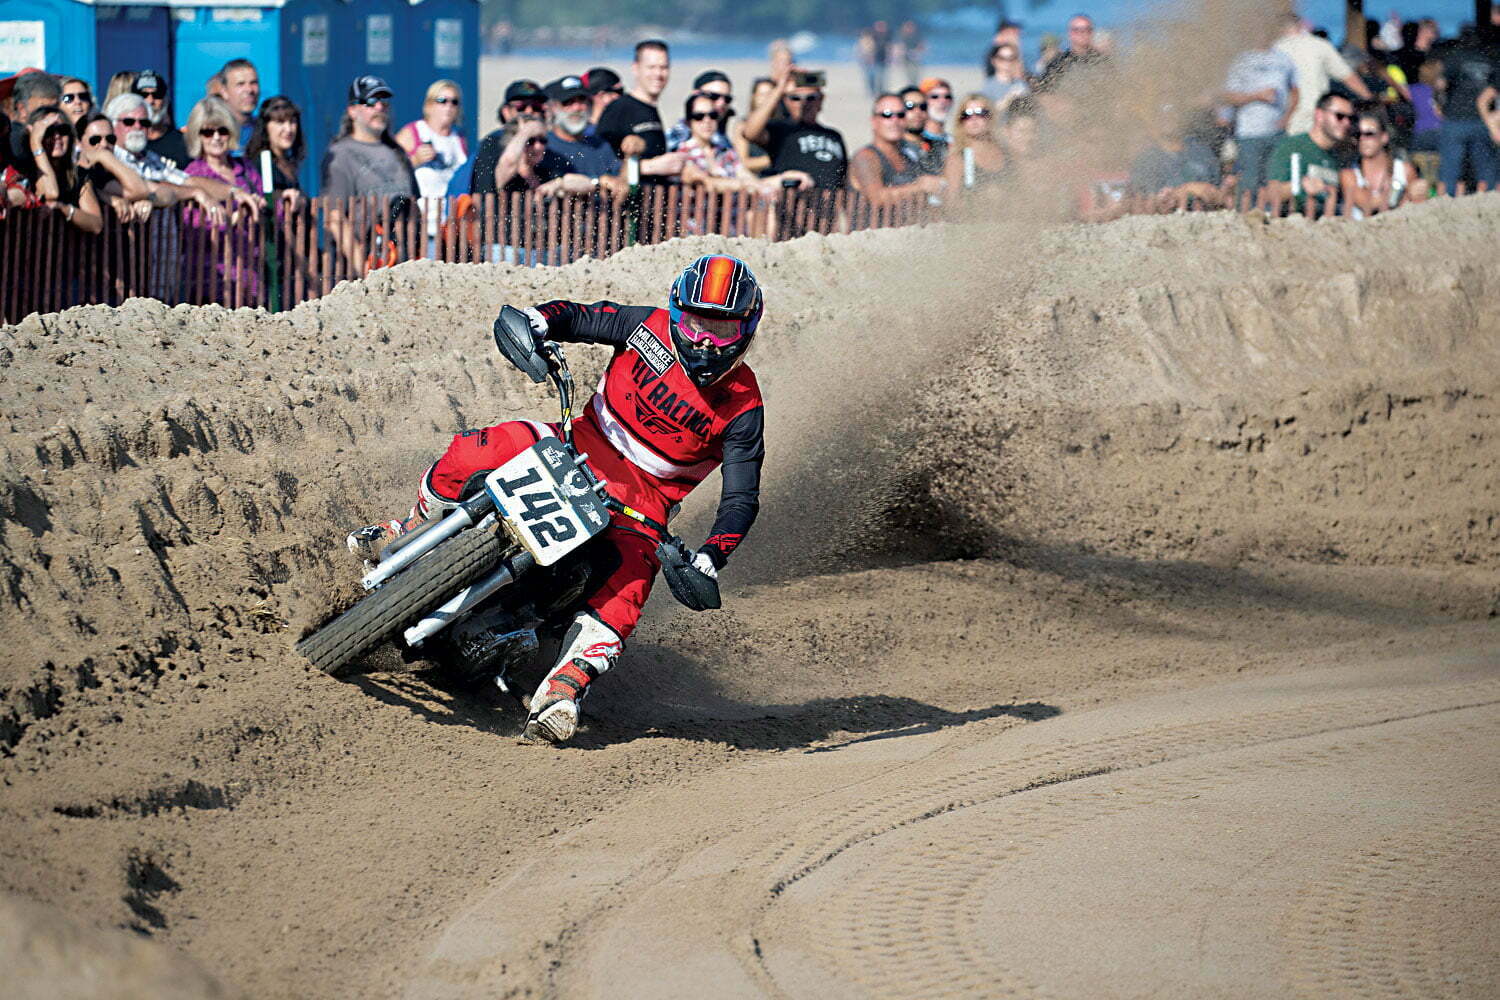 riders up on the berm